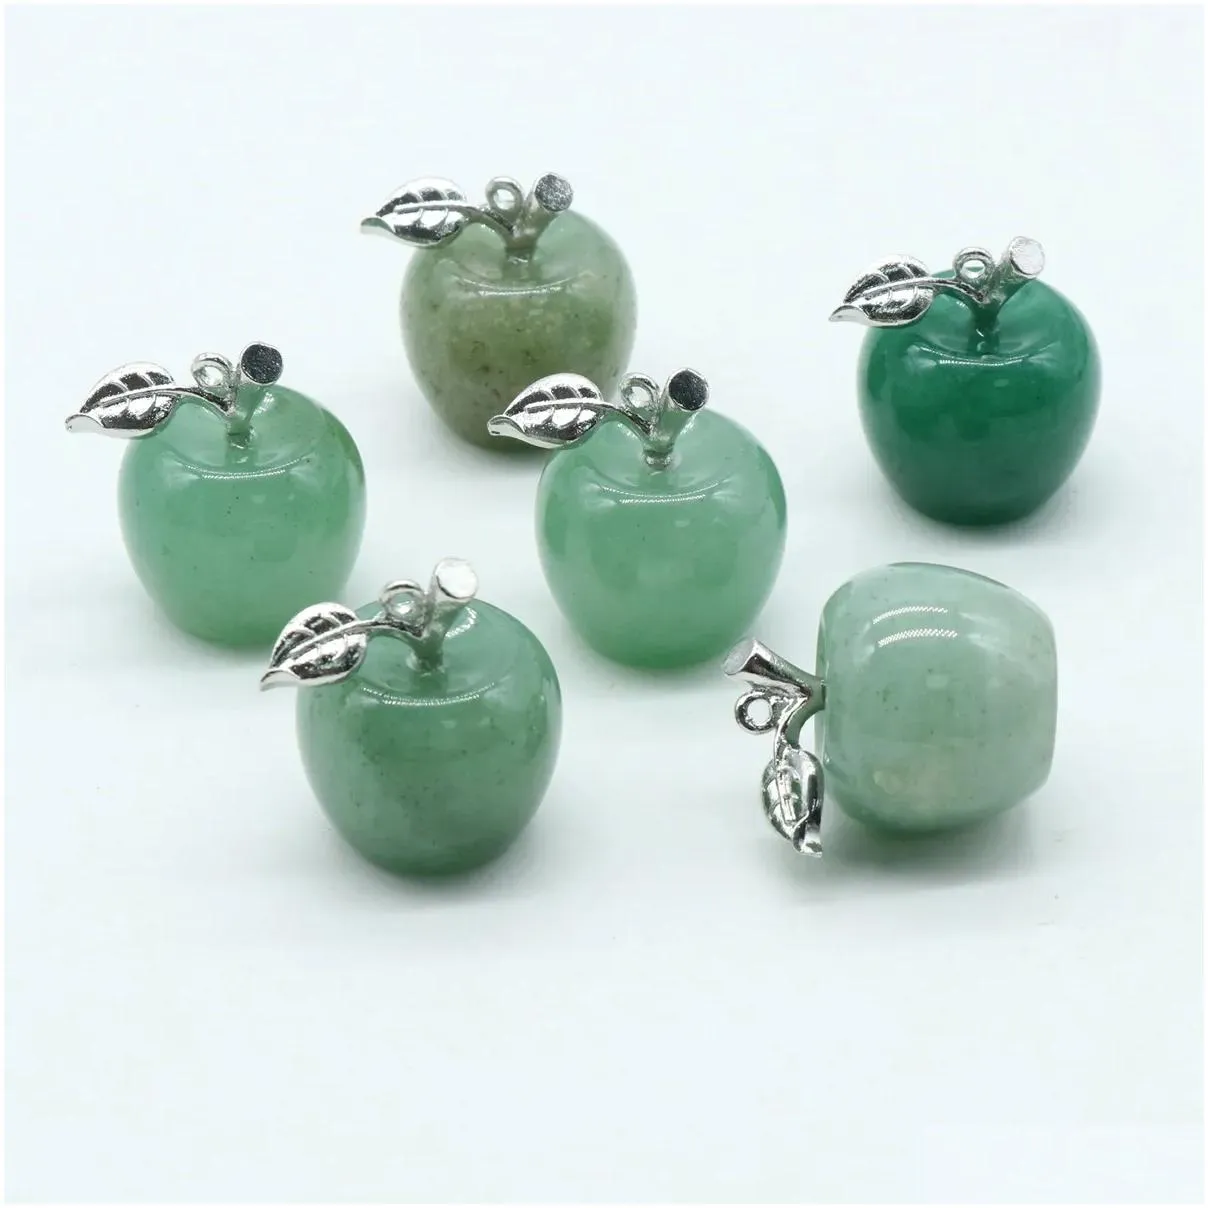 Multiple Shapes Green Aventurine Jewelry Decorations Healing Natural Crystal Gemstone for Women Men Gift